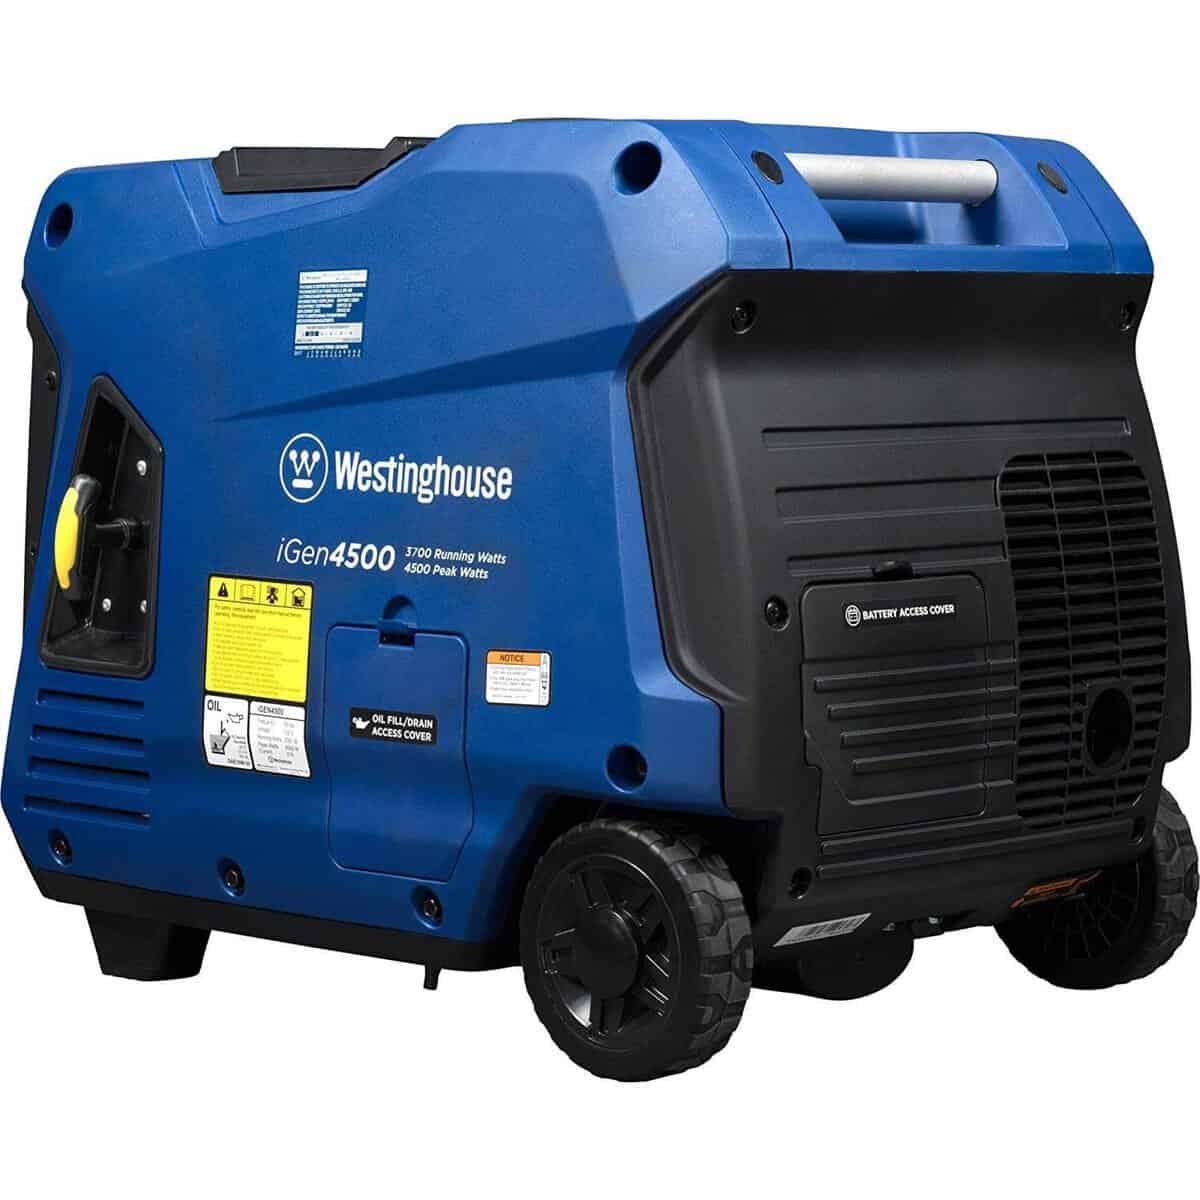 Portable Generator Material Quality